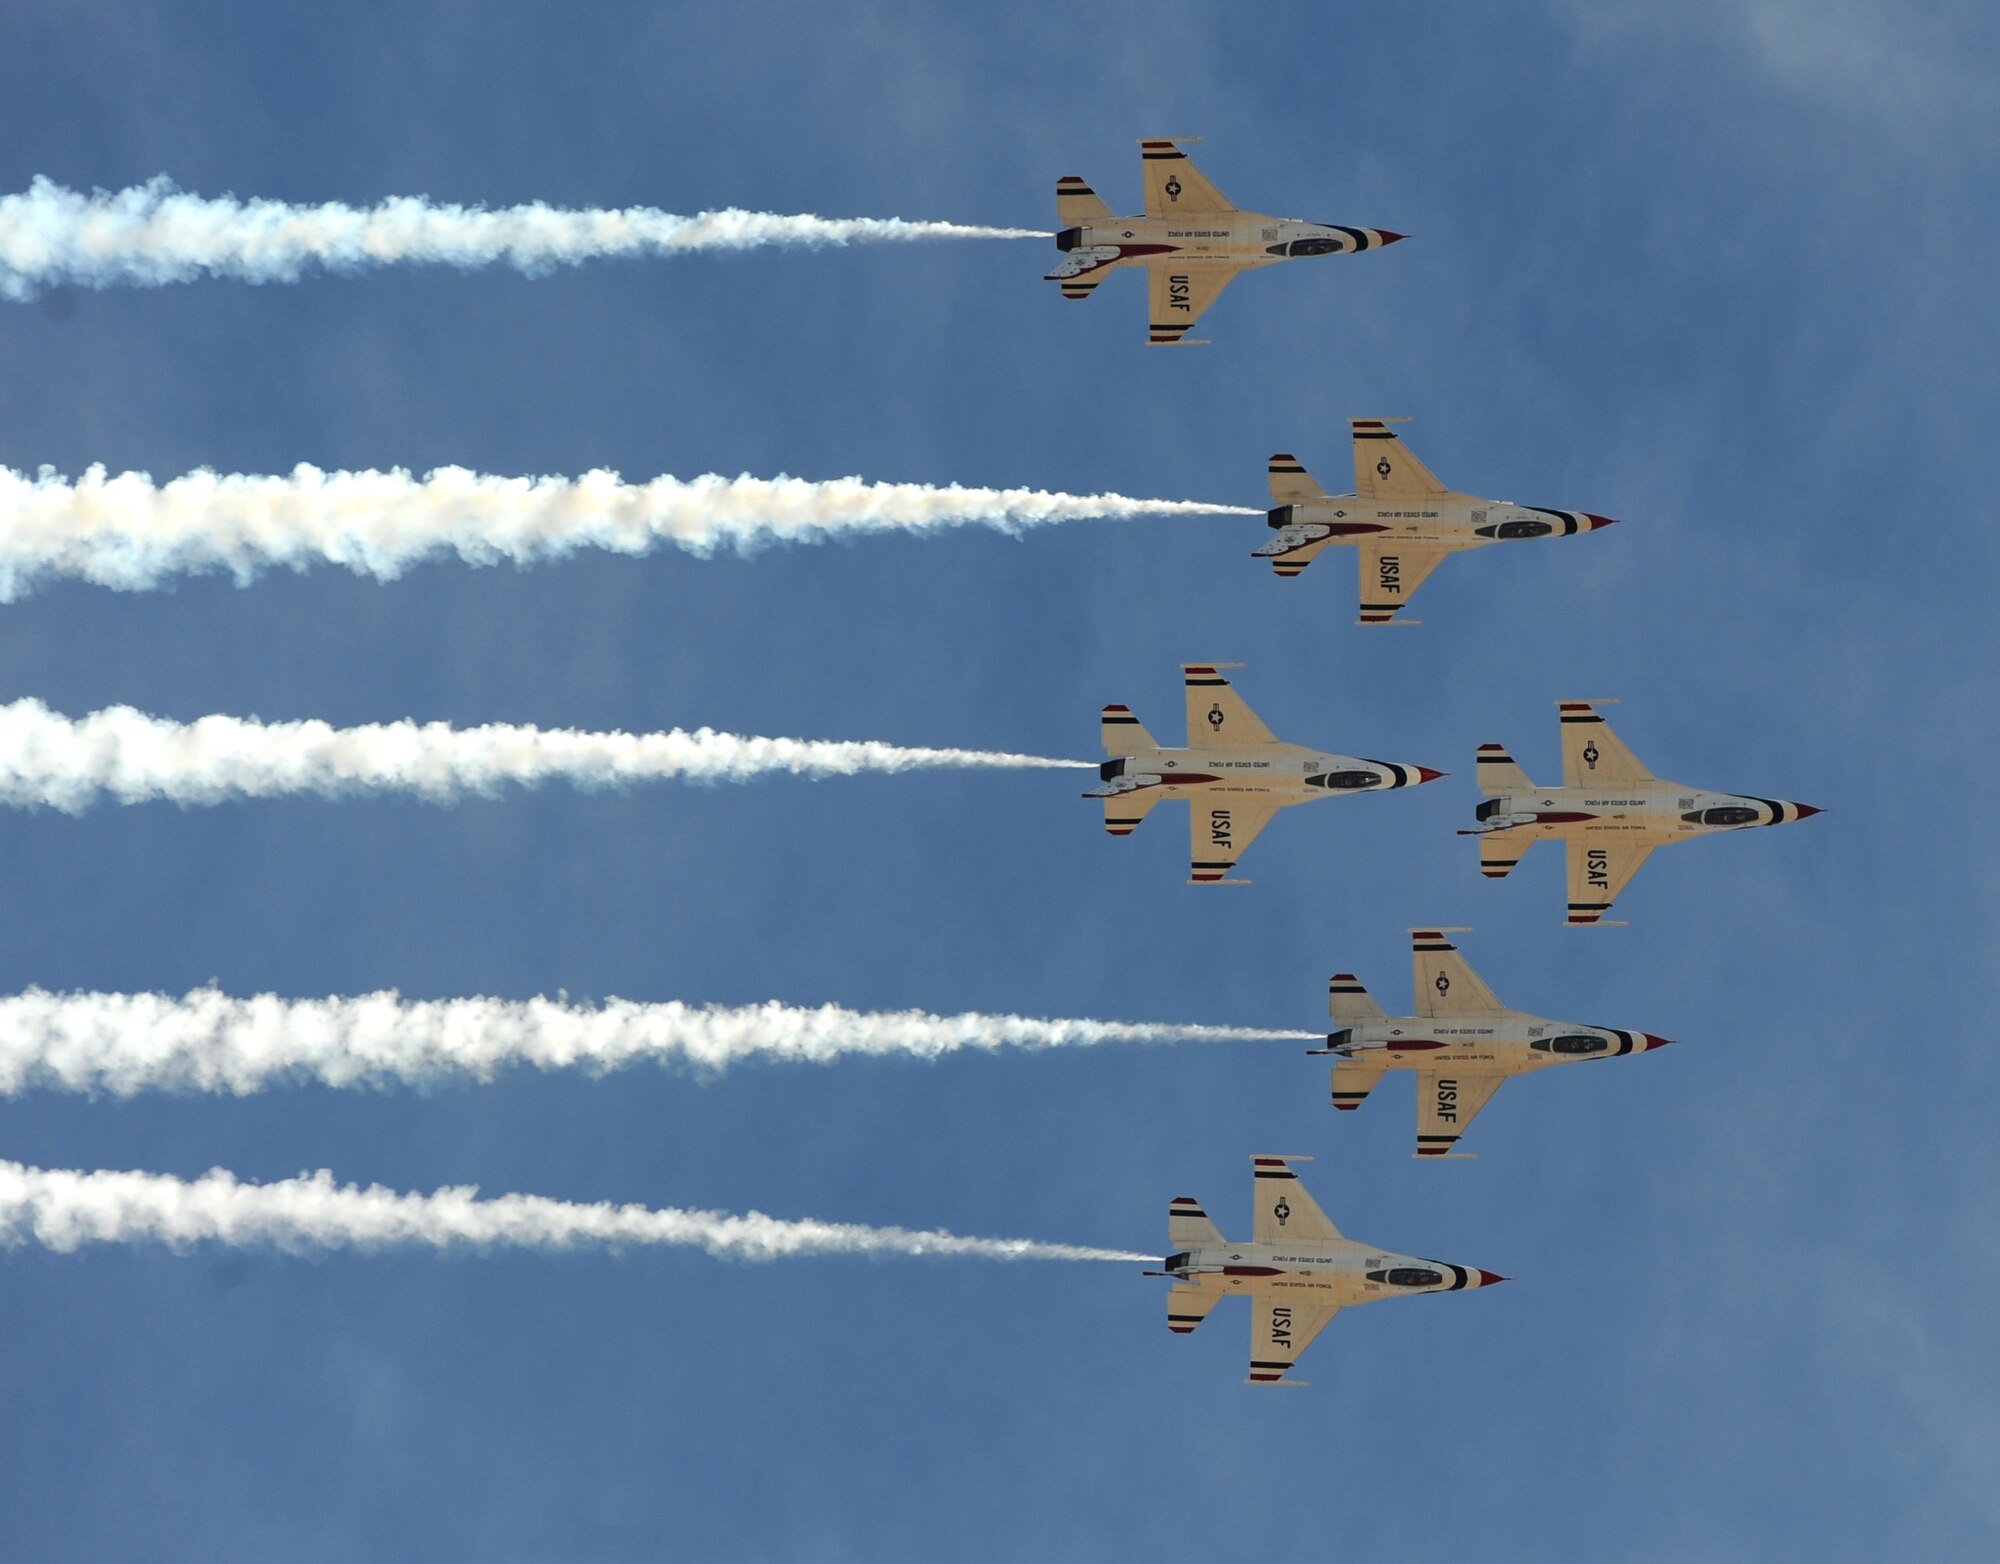 The U.S. Air Force Thunderbirds demonstration team execute a six-ship loop during the Capital City Air Show at Mather Airport, Sacramento, Calif., Sept. 8, 2012. The team is in its 59th year of performance. (U.S. Air Force photo by Staff Sgt. Robert M. Trujillo)